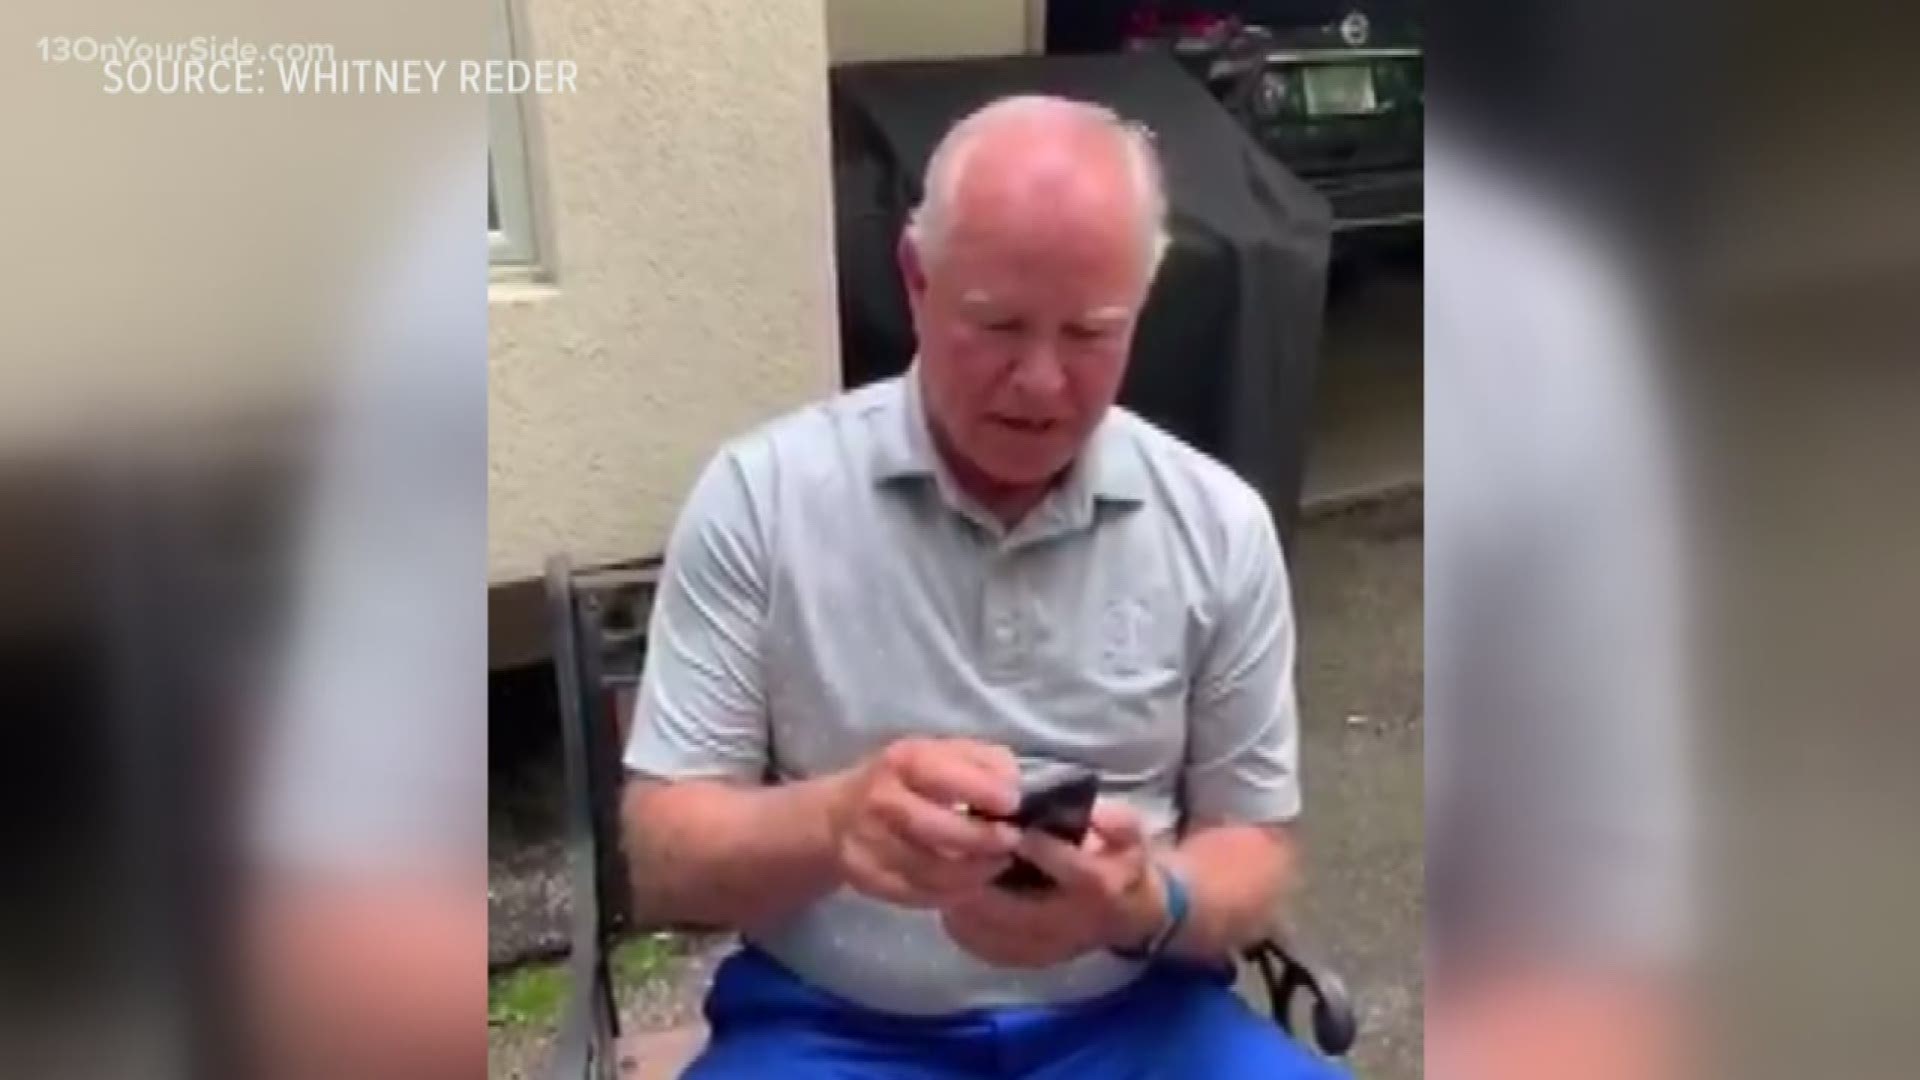 Grandpa surprised with Lady Gaga tickets